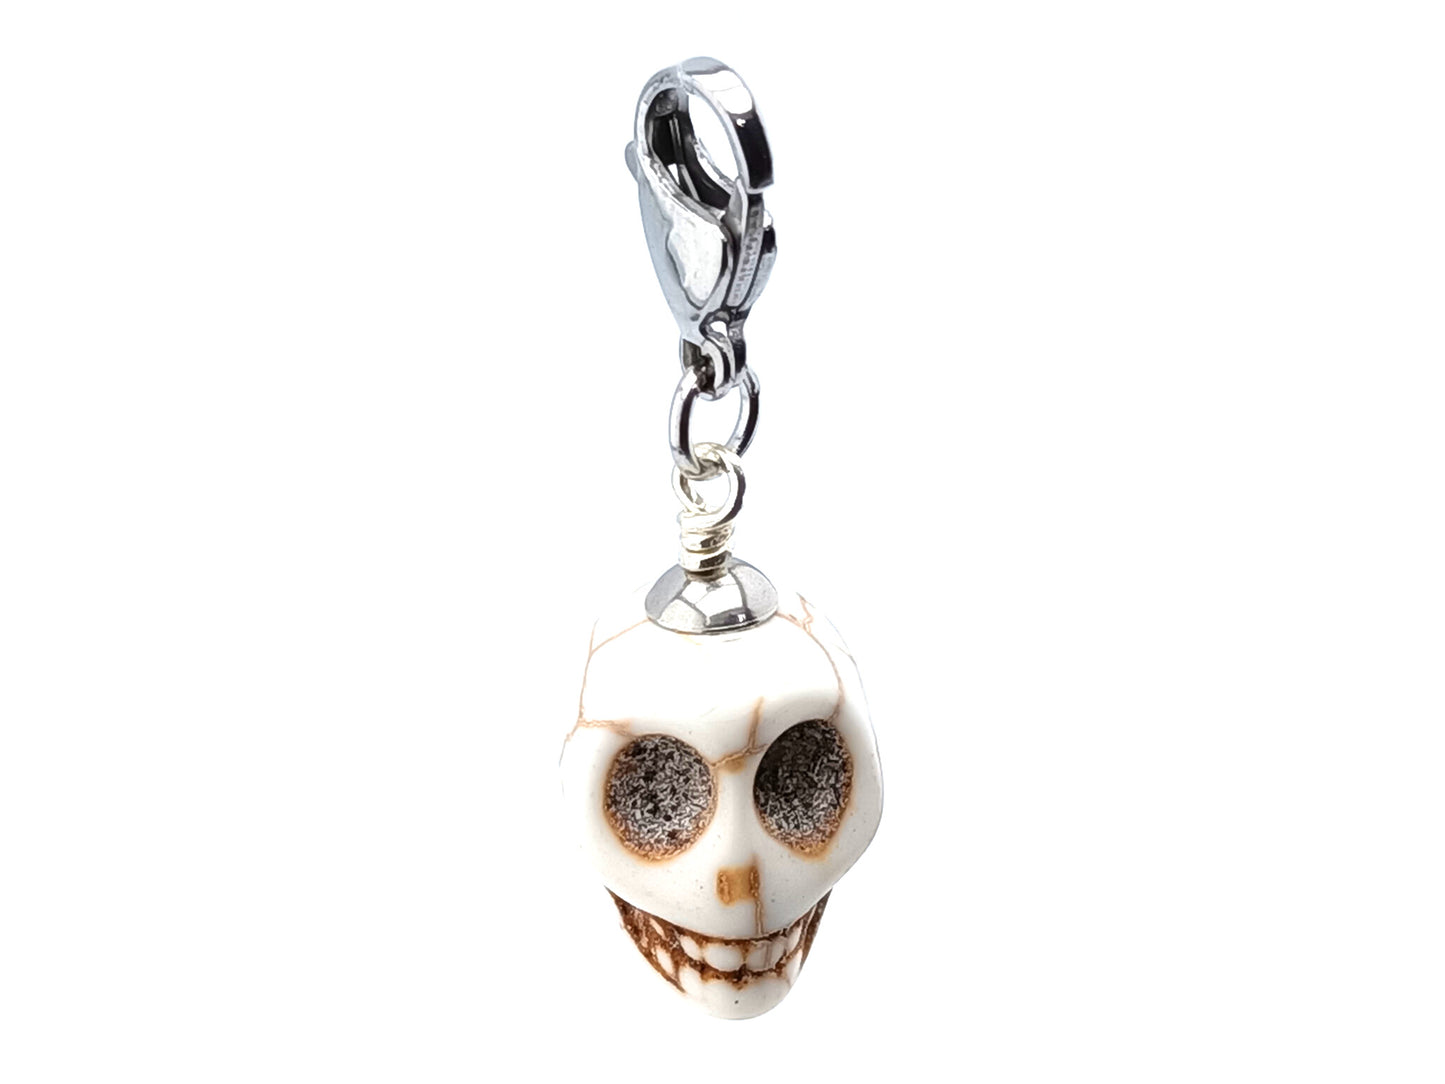 Large Memento Mori unique rosary beads howlite purse clip key fob key chain with stainless steel lobster clasp.